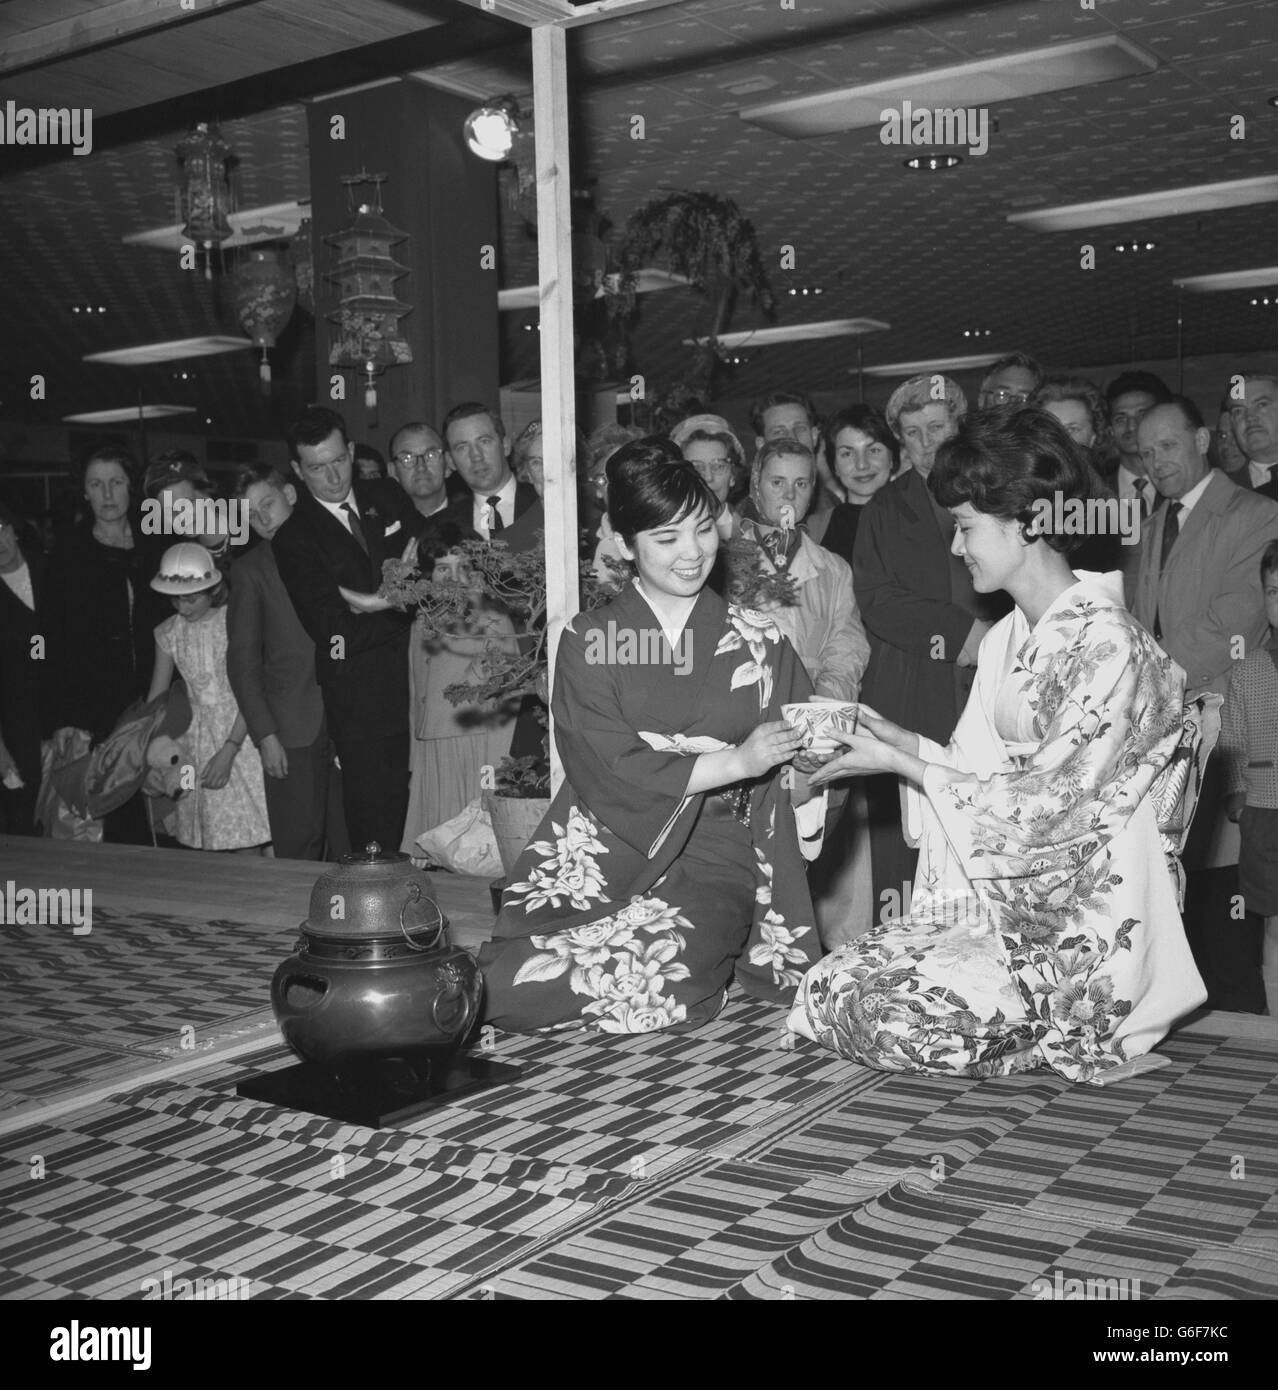 A crowd watches kimono-clad Japanese women Miss Eiko Murai (left) and Miss Mitchiko Ishikawa perform an ancient tea-making ceremony at Selfridge's store in Oxford Street, London, during a week-long showing of Japanese goods. The tea-making ritual is regarded as a promoter of mental composure. Stock Photo